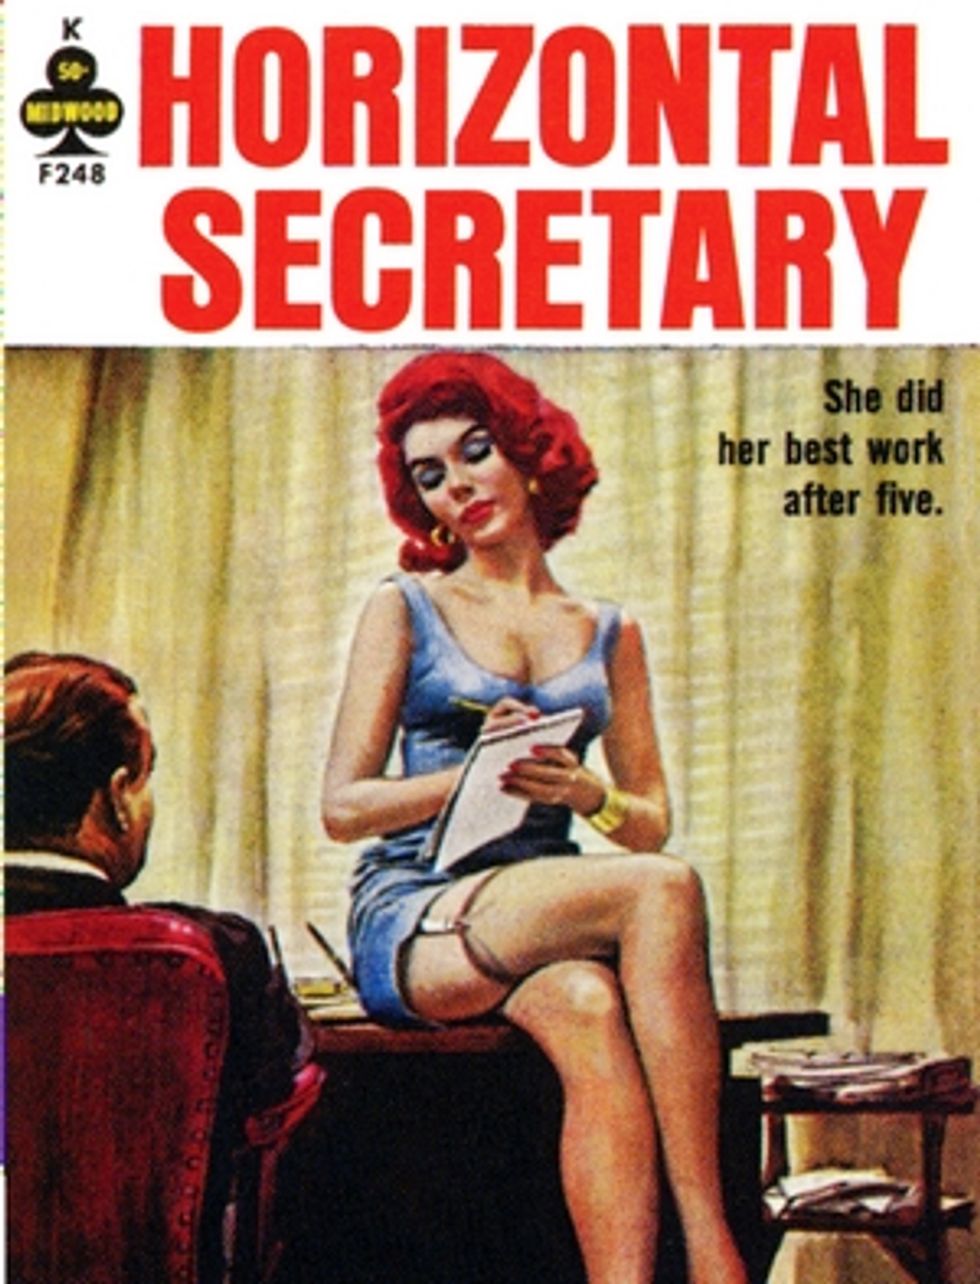 Brian Fischer Explains Why God Made Women To Be Secretaries, Just Like In Bible Times